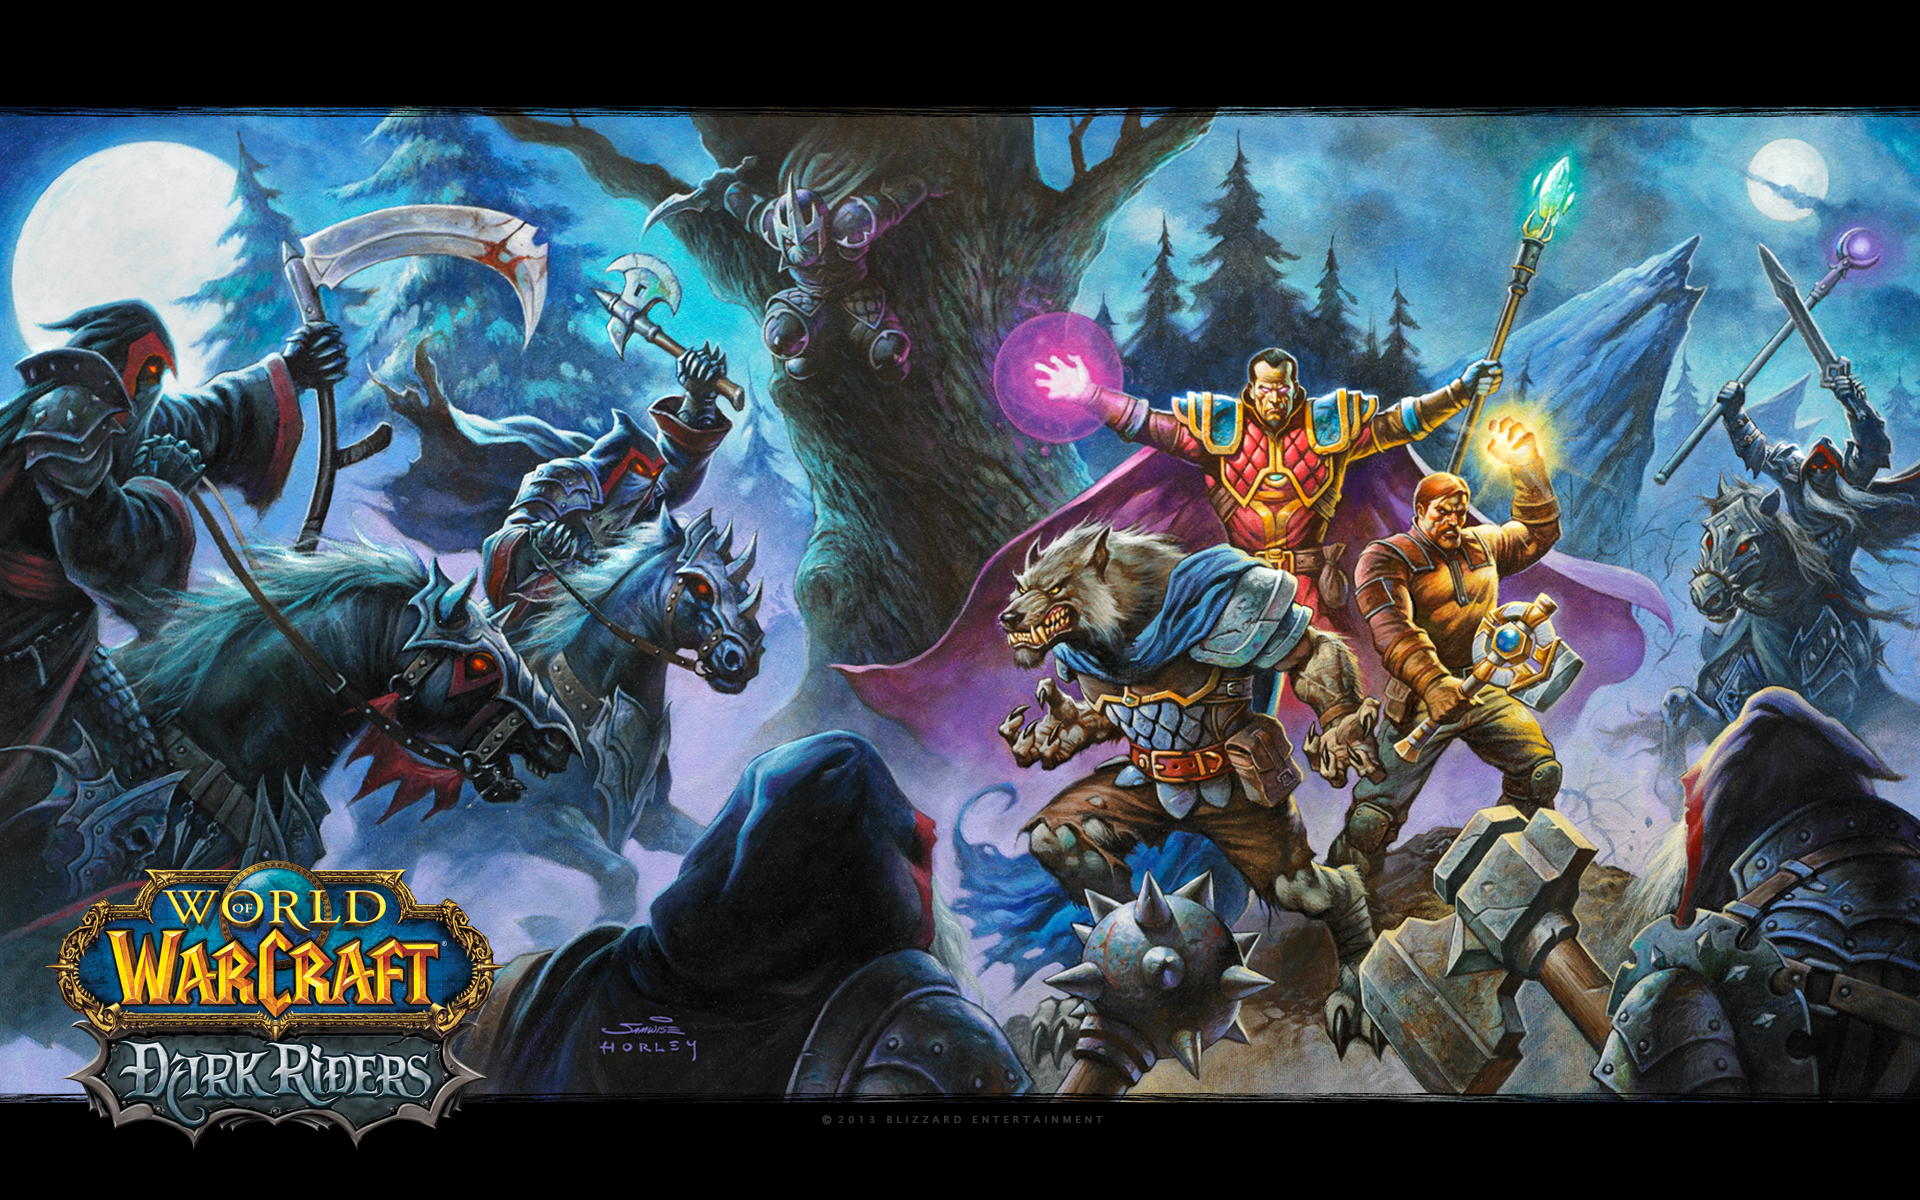 The Official World of Warcraft: Dark Riders Wallpaper Available